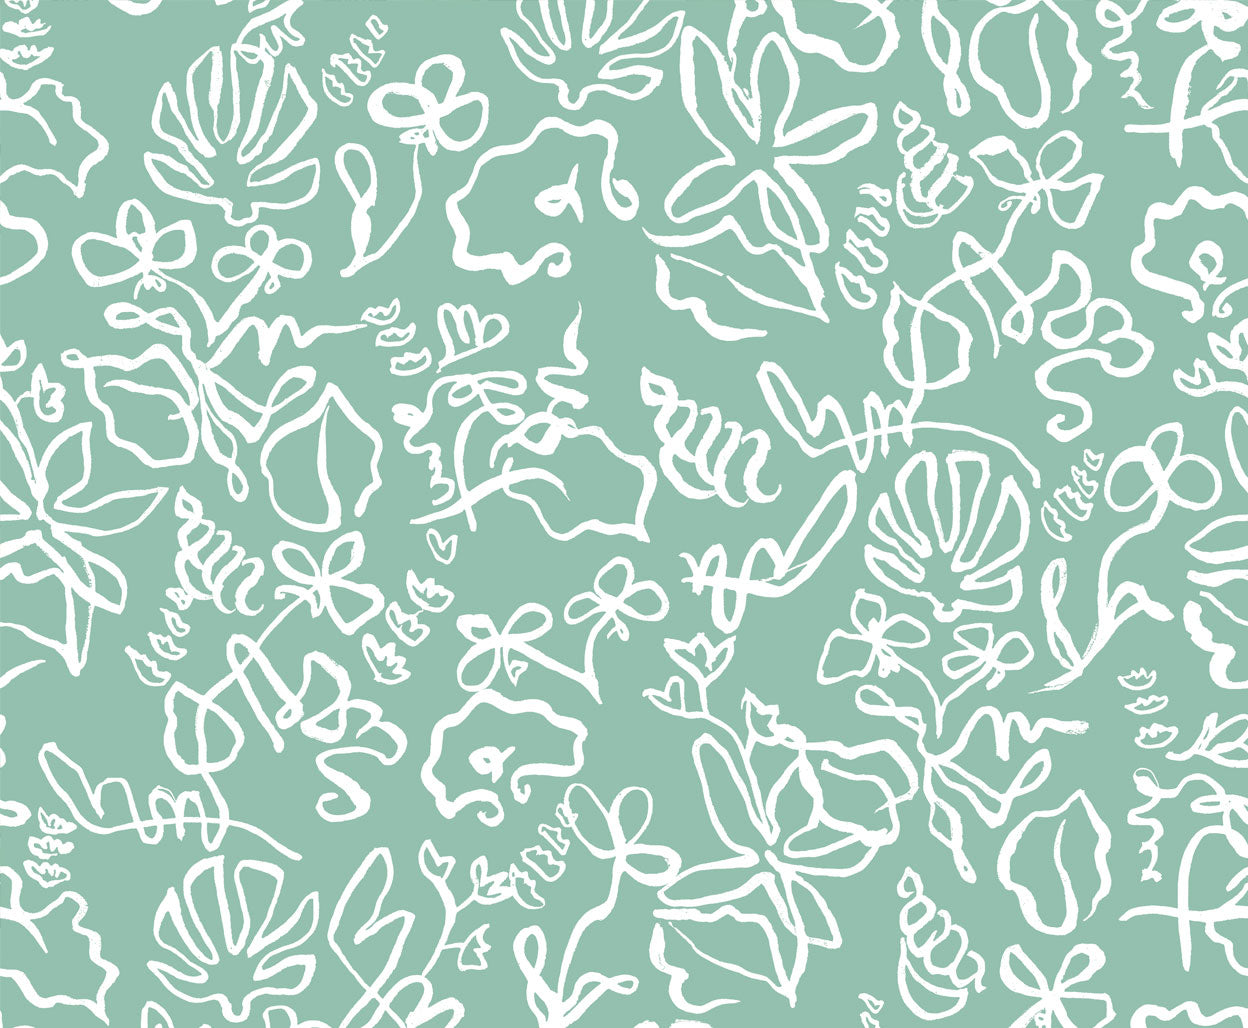 Detail of wallpaper in a painterly seashell print in white on a teal field.